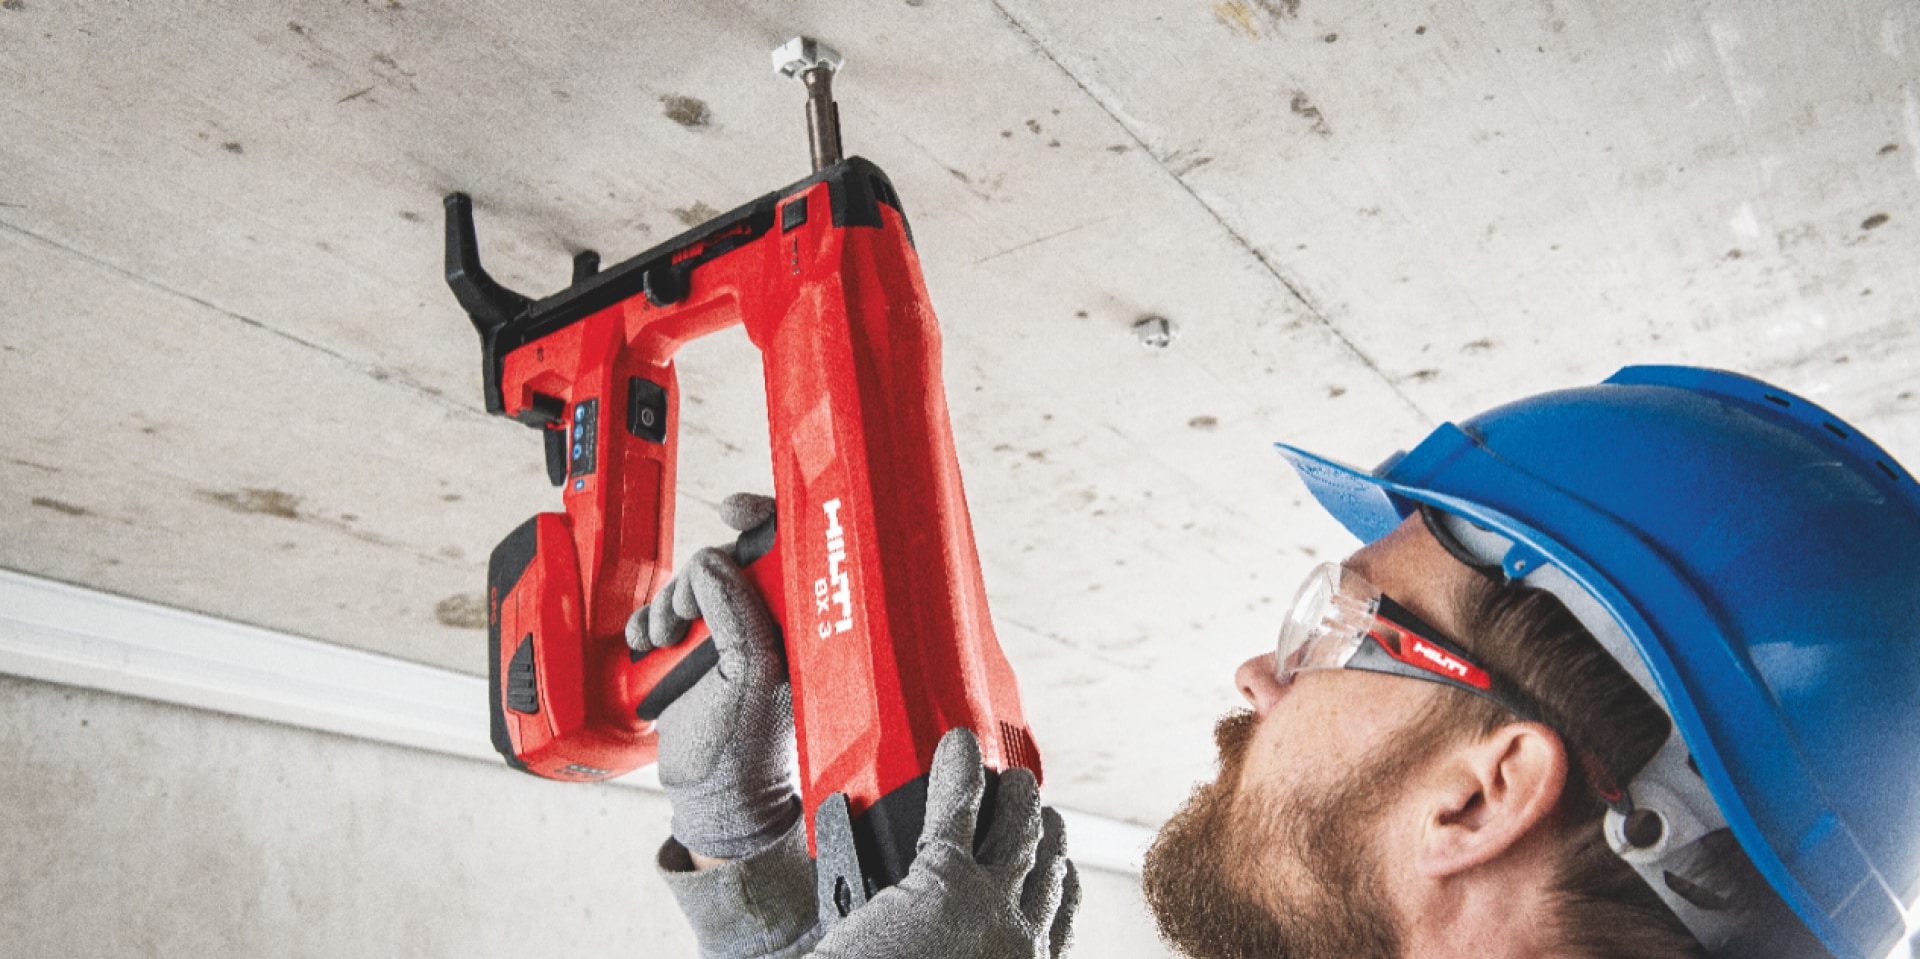 BX 3 battery-powered nailer, a low vibration alternative to drilling, being used to fasten on concrete